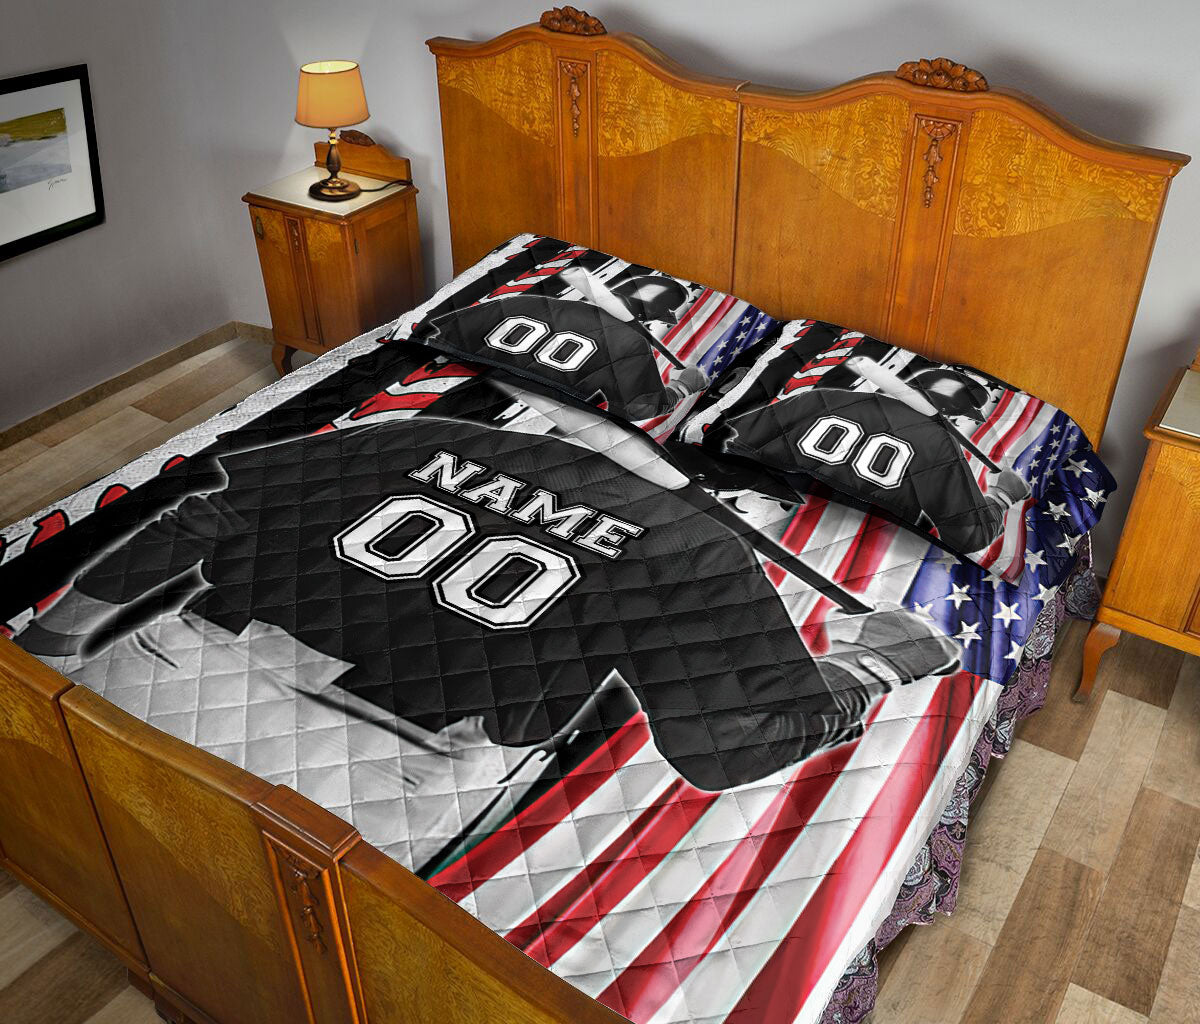 Ohaprints-Quilt-Bed-Set-Pillowcase-Softball-Baseball-Lover-Player-America-Us-Flag-Custom-Personalized-Name-Number-Blanket-Bedspread-Bedding-2358-Queen (80'' x 90'')